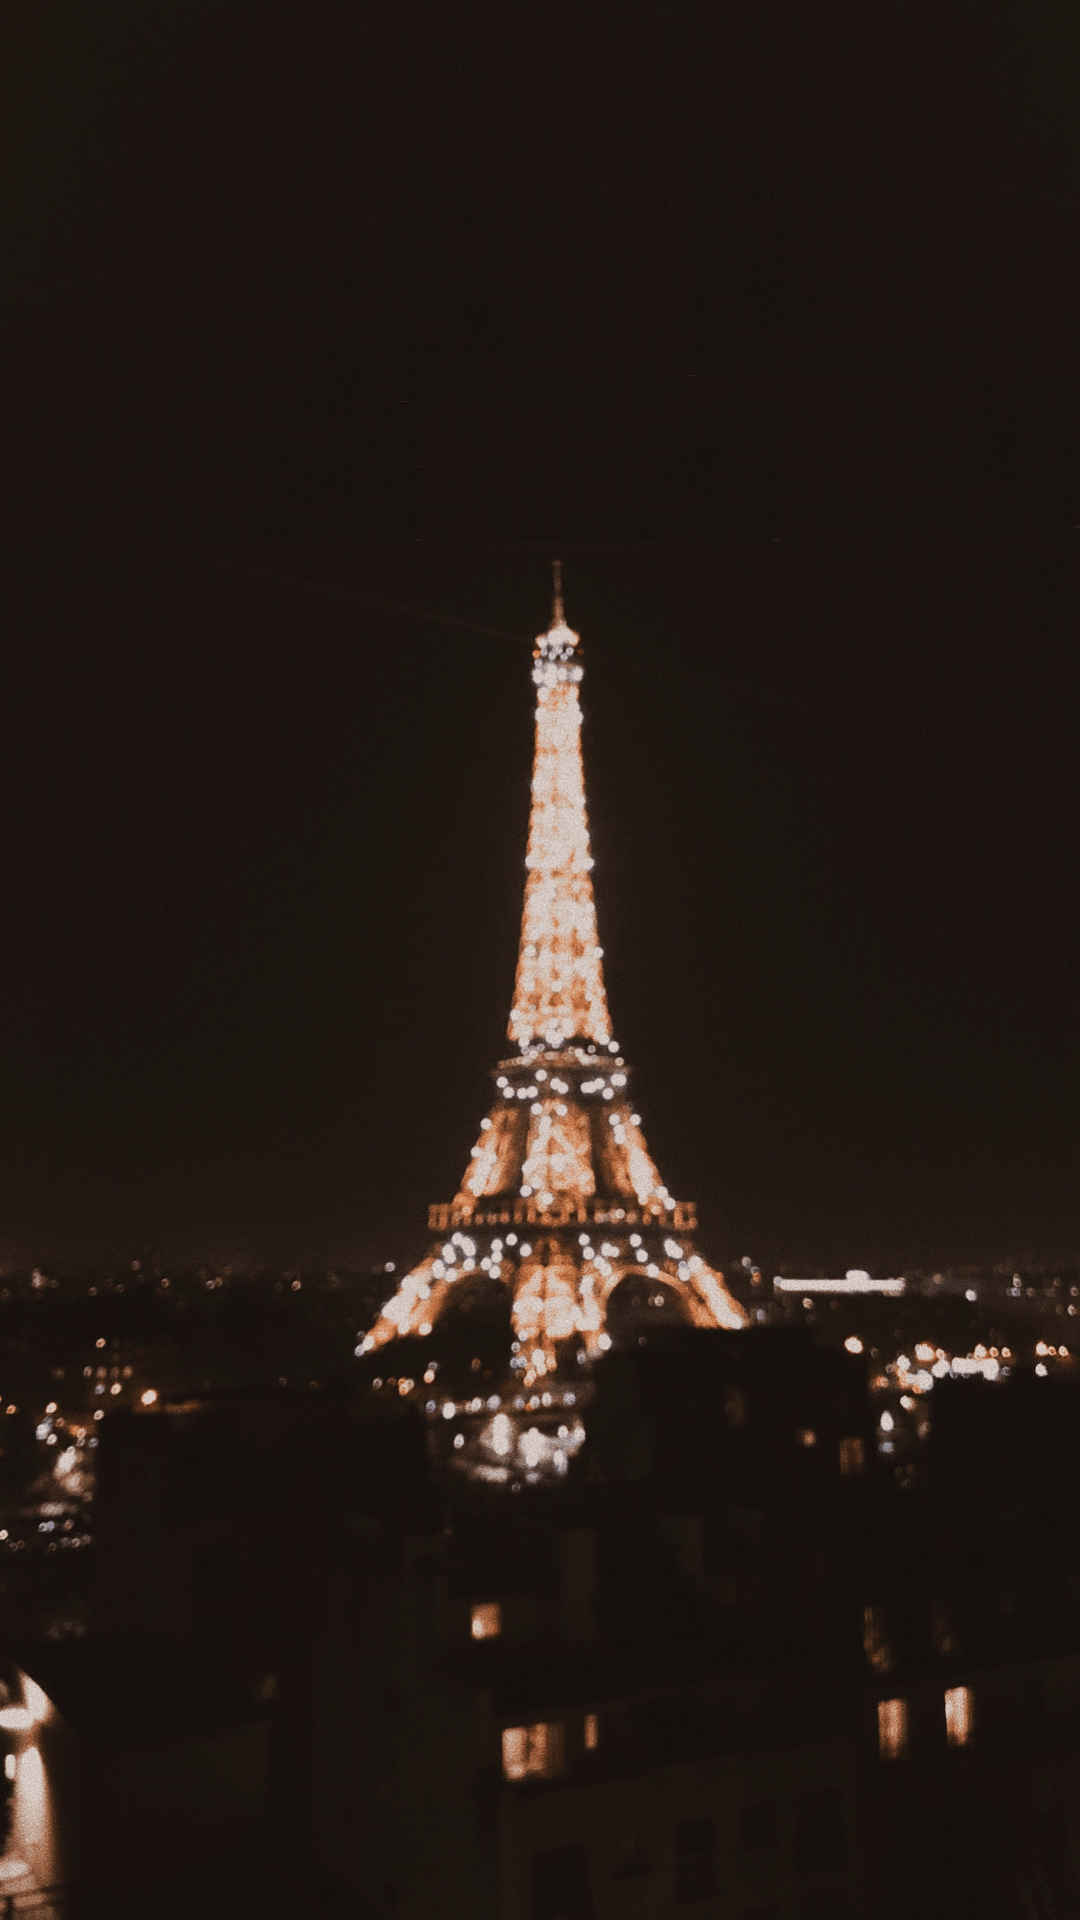 A blurry photo of the Eiffel Tower lit up at night. - Paris, Eiffel Tower